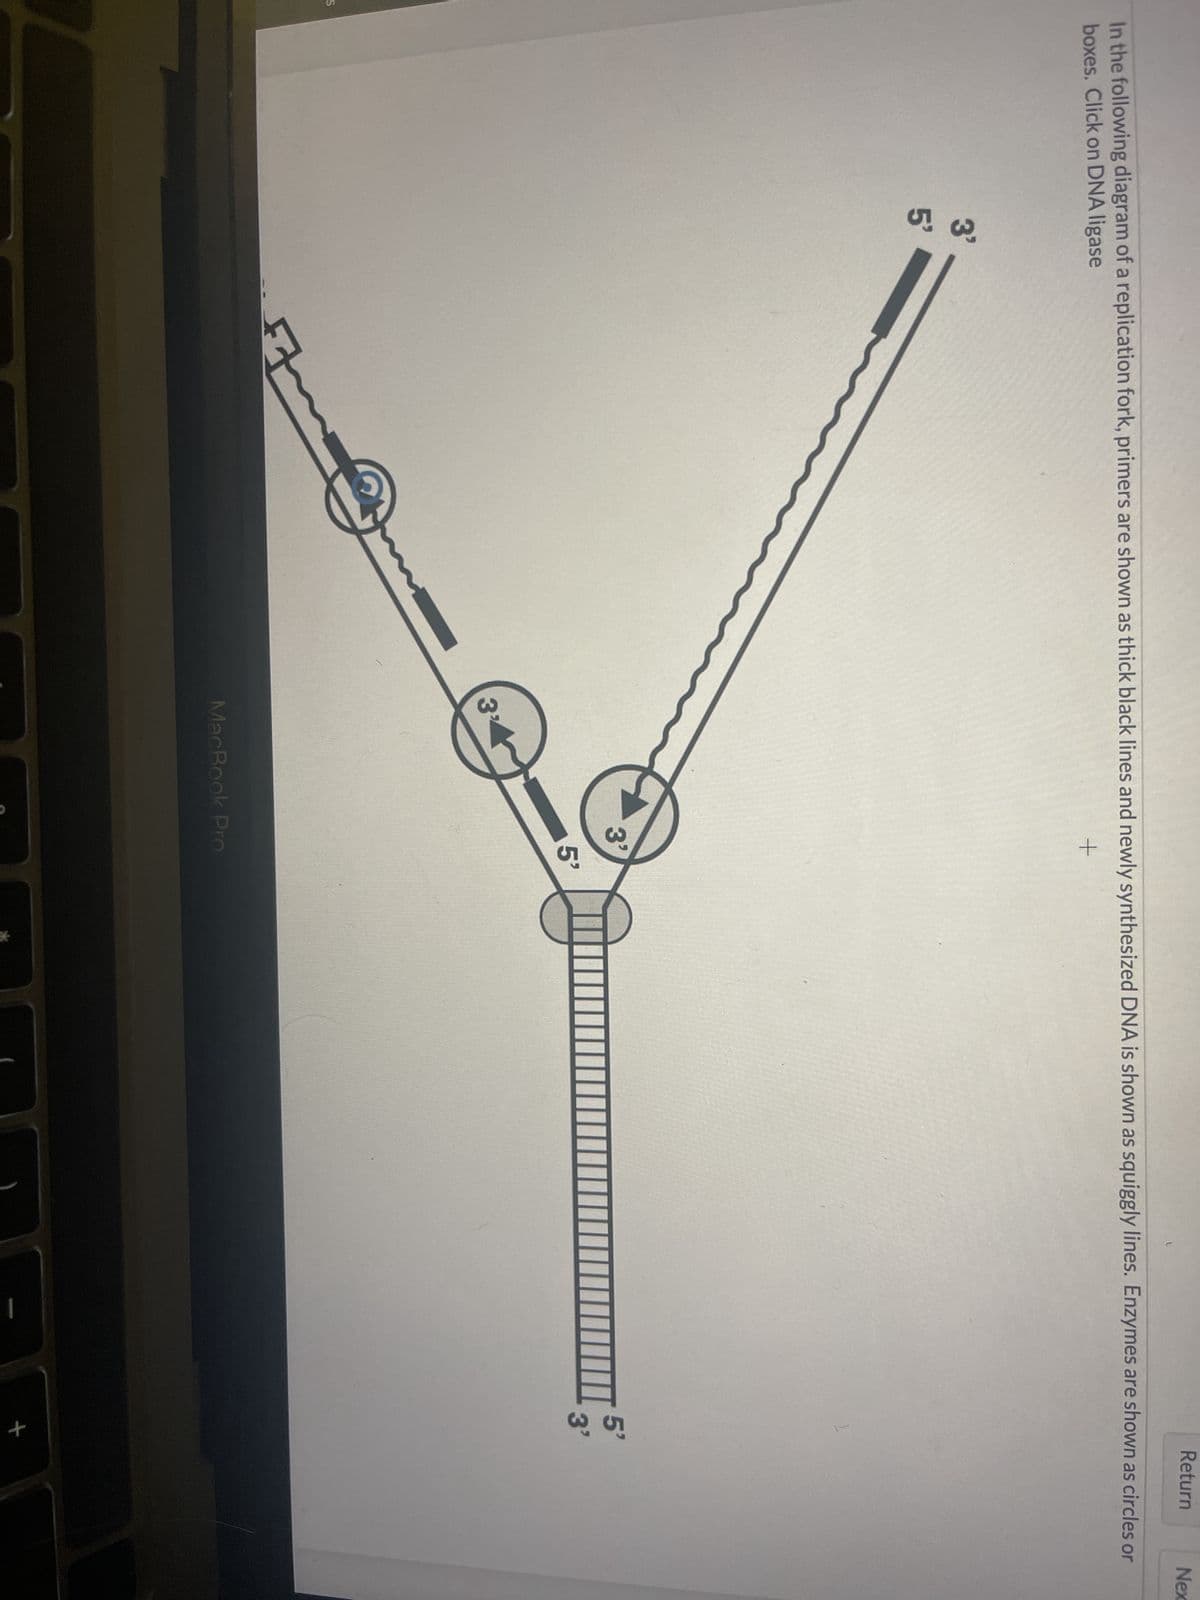 S
In the following diagram of a replication fork, primers are shown as thick black lines and newly synthesized DNA is shown as squiggly lines. Enzymes are shown as circles or
boxes. Click on DNA ligase
+
3'
5'
3%
3'
5'
MacBook Pro
Return
5'
3'
Nex